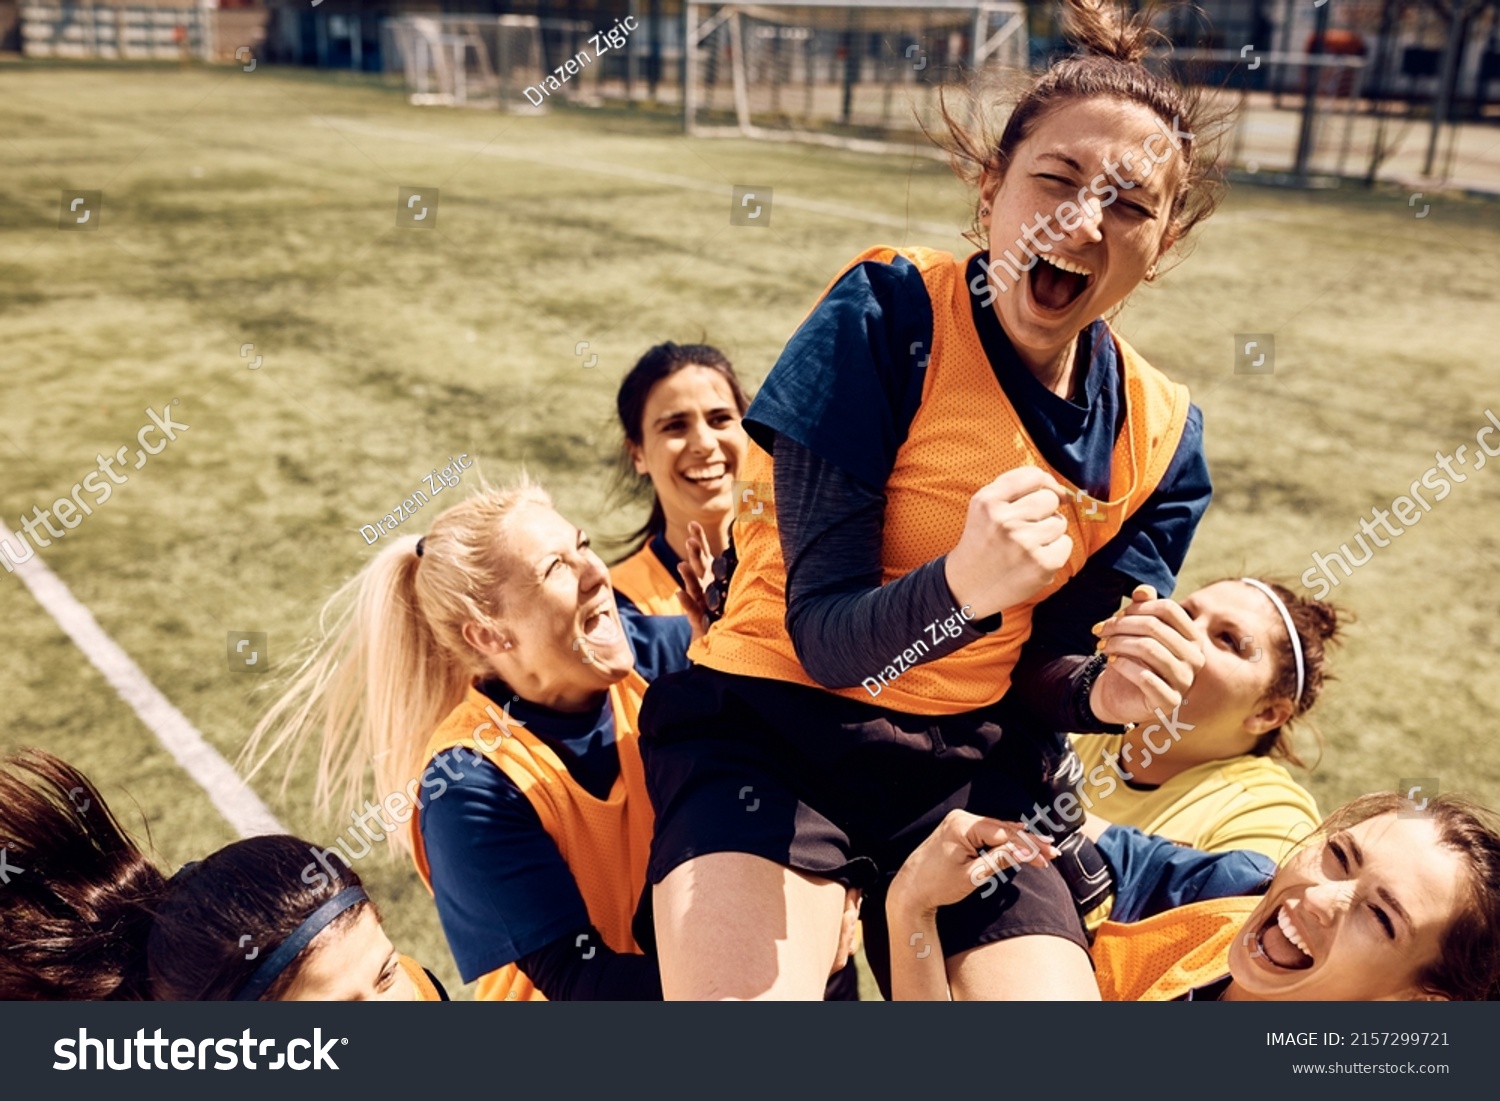 Cheerful team of female soccer players celebrating victory and carrying on of teammates who is shouting out of joy on stadium. #2157299721